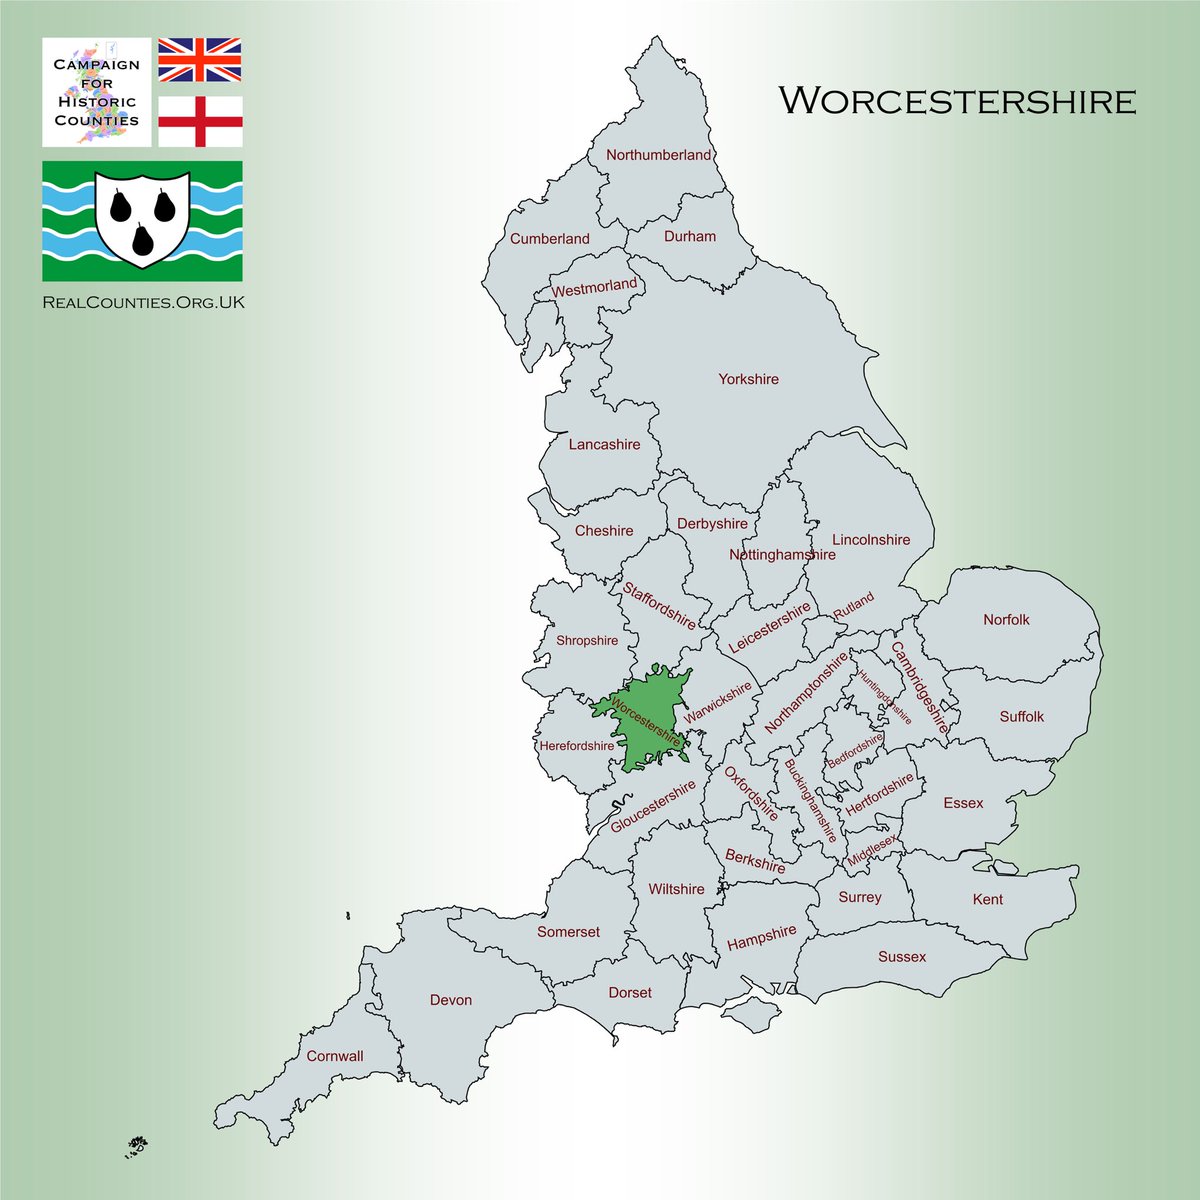 The County of #Worcester is a shire in the Midlands.

#Worcestershire is a mixture of the very rural and the very urban.

In the centre of the shire is the fine cathedral city of Worcester, which sits on the banks of the River Severn.

🇬🇧 #HistoricCounties | #RealCounties 🏴󠁧󠁢󠁥󠁮󠁧󠁿